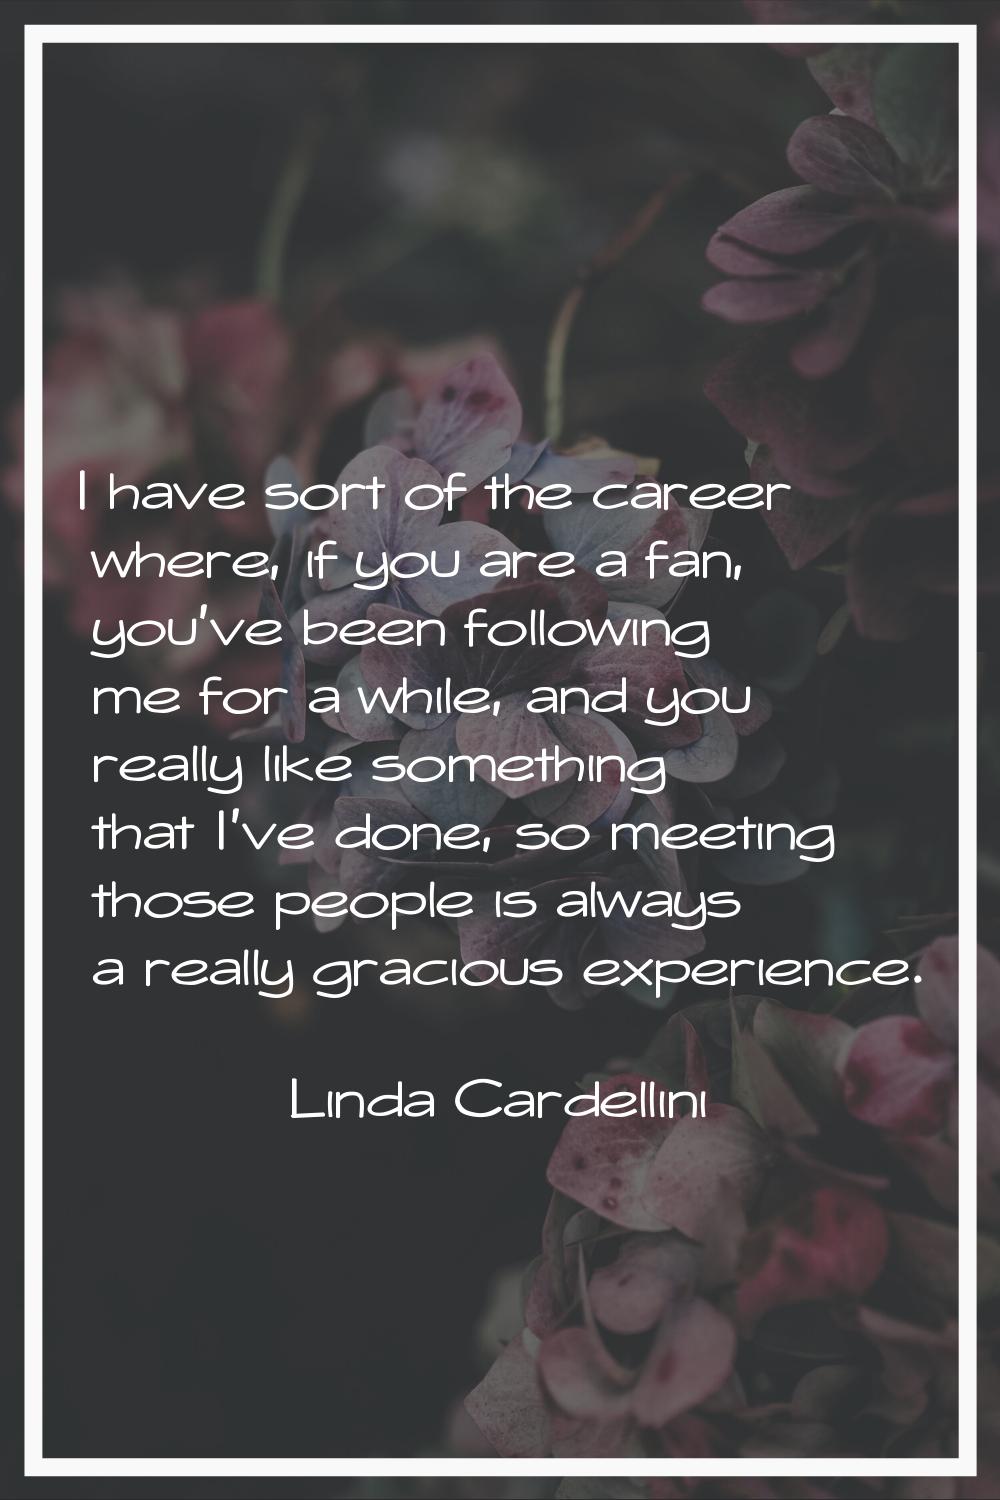 I have sort of the career where, if you are a fan, you've been following me for a while, and you re